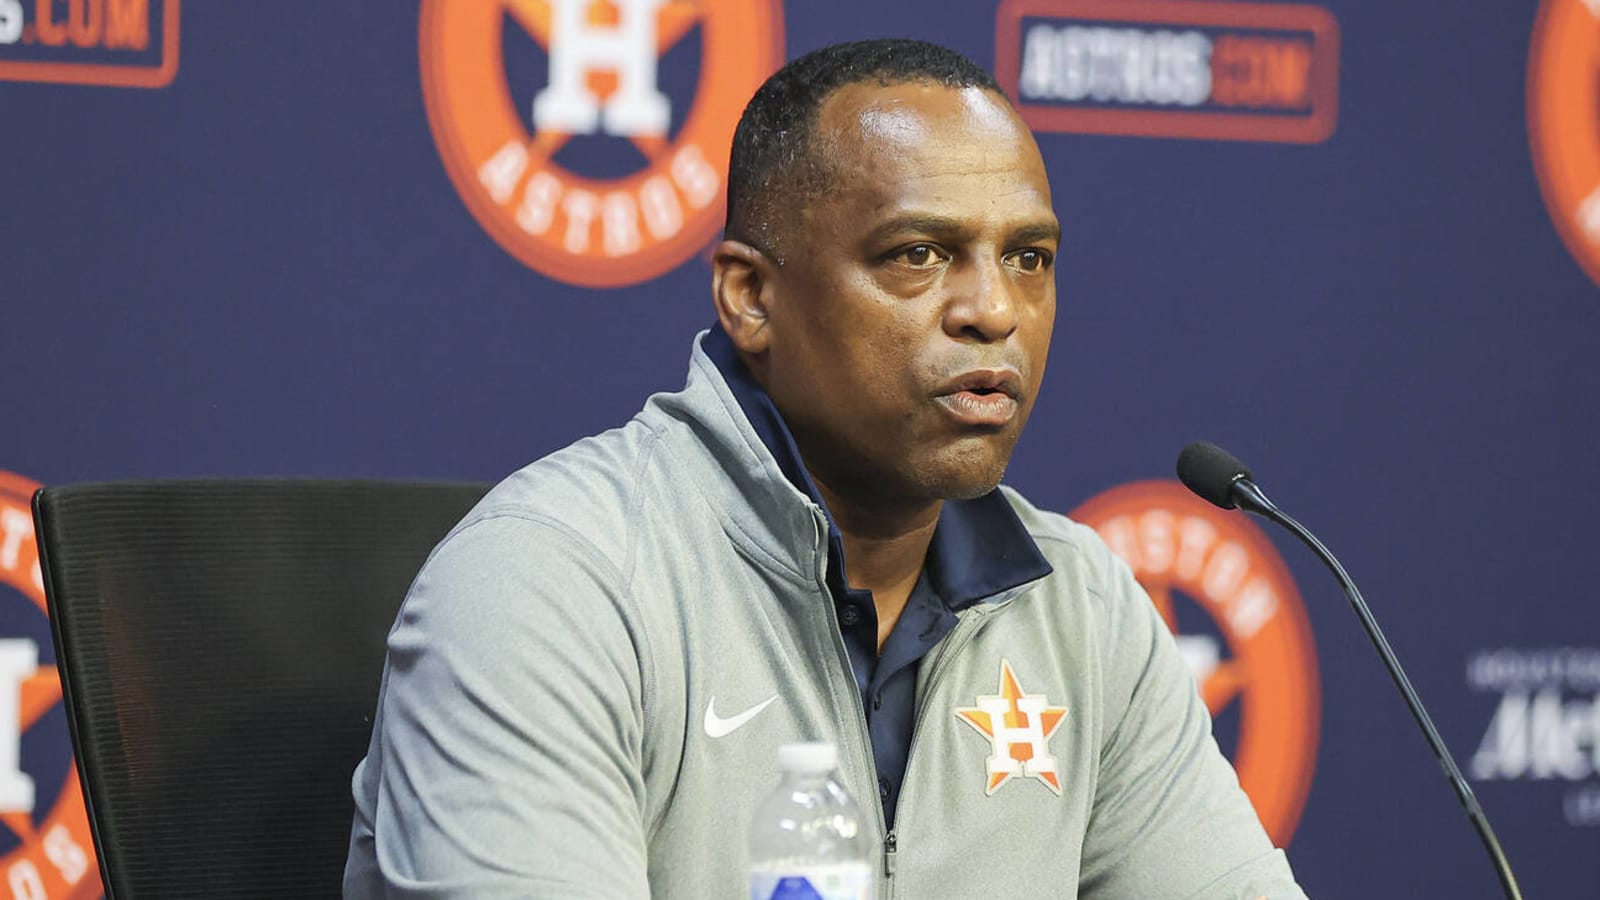 Astros GM contradicts team owner on manager search timeline